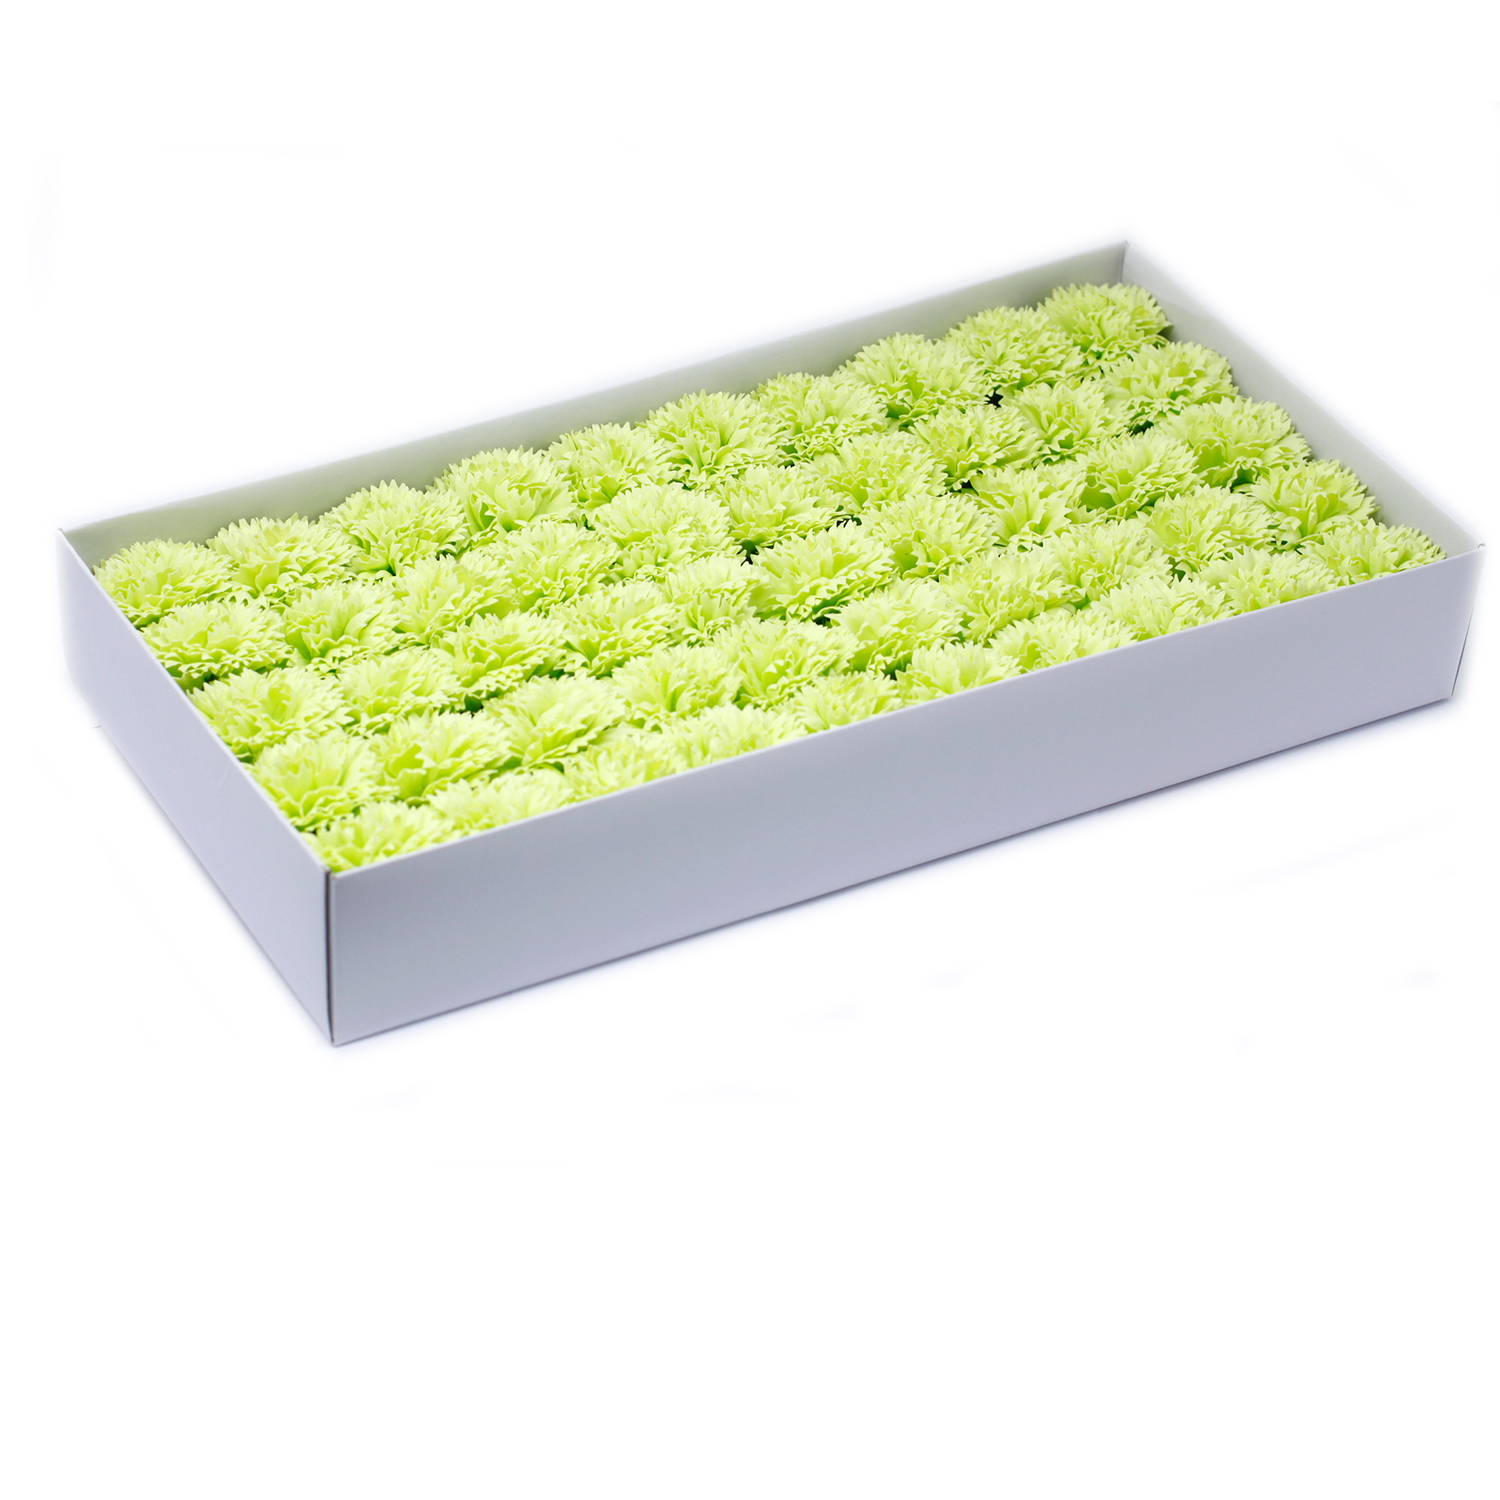 10 x Craft Soap Flowers - Carnations - Lime